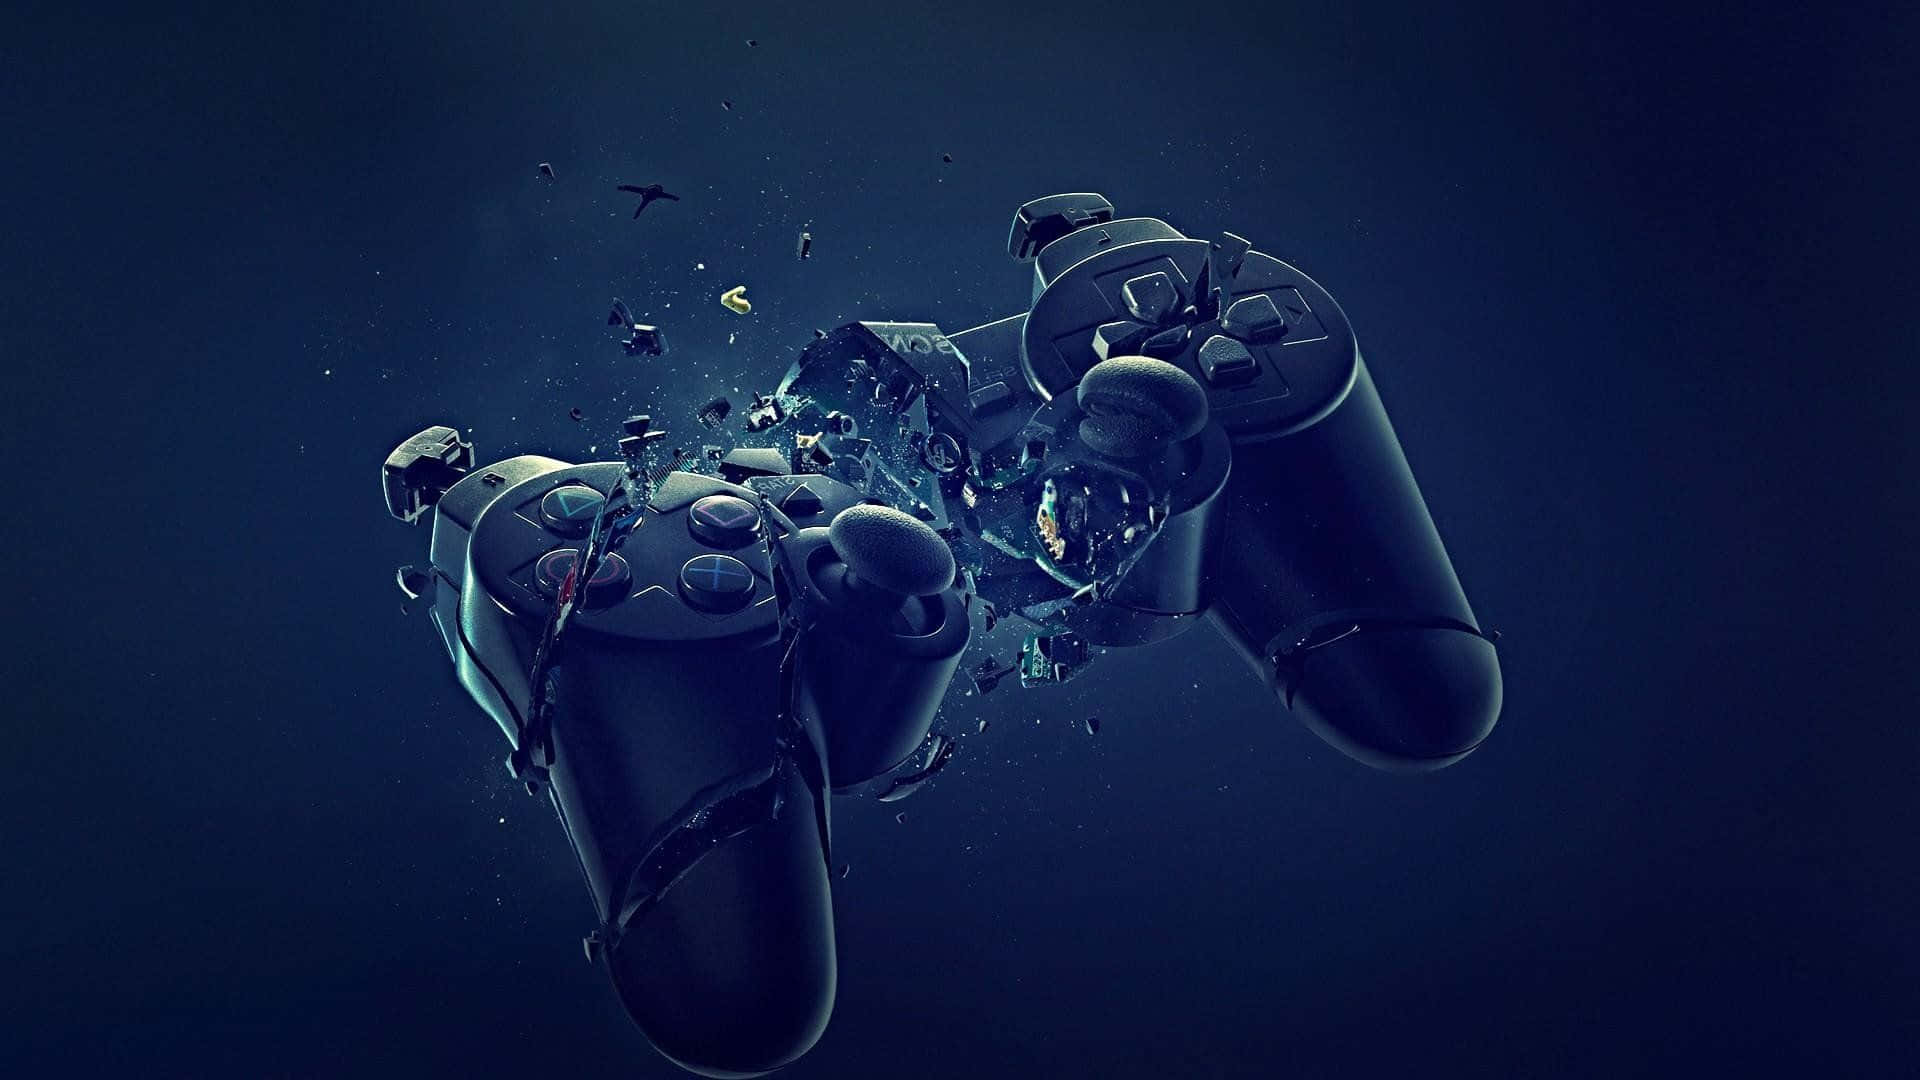 Cool Ps4 Broken And Shattered In The Middle Of Controller Background